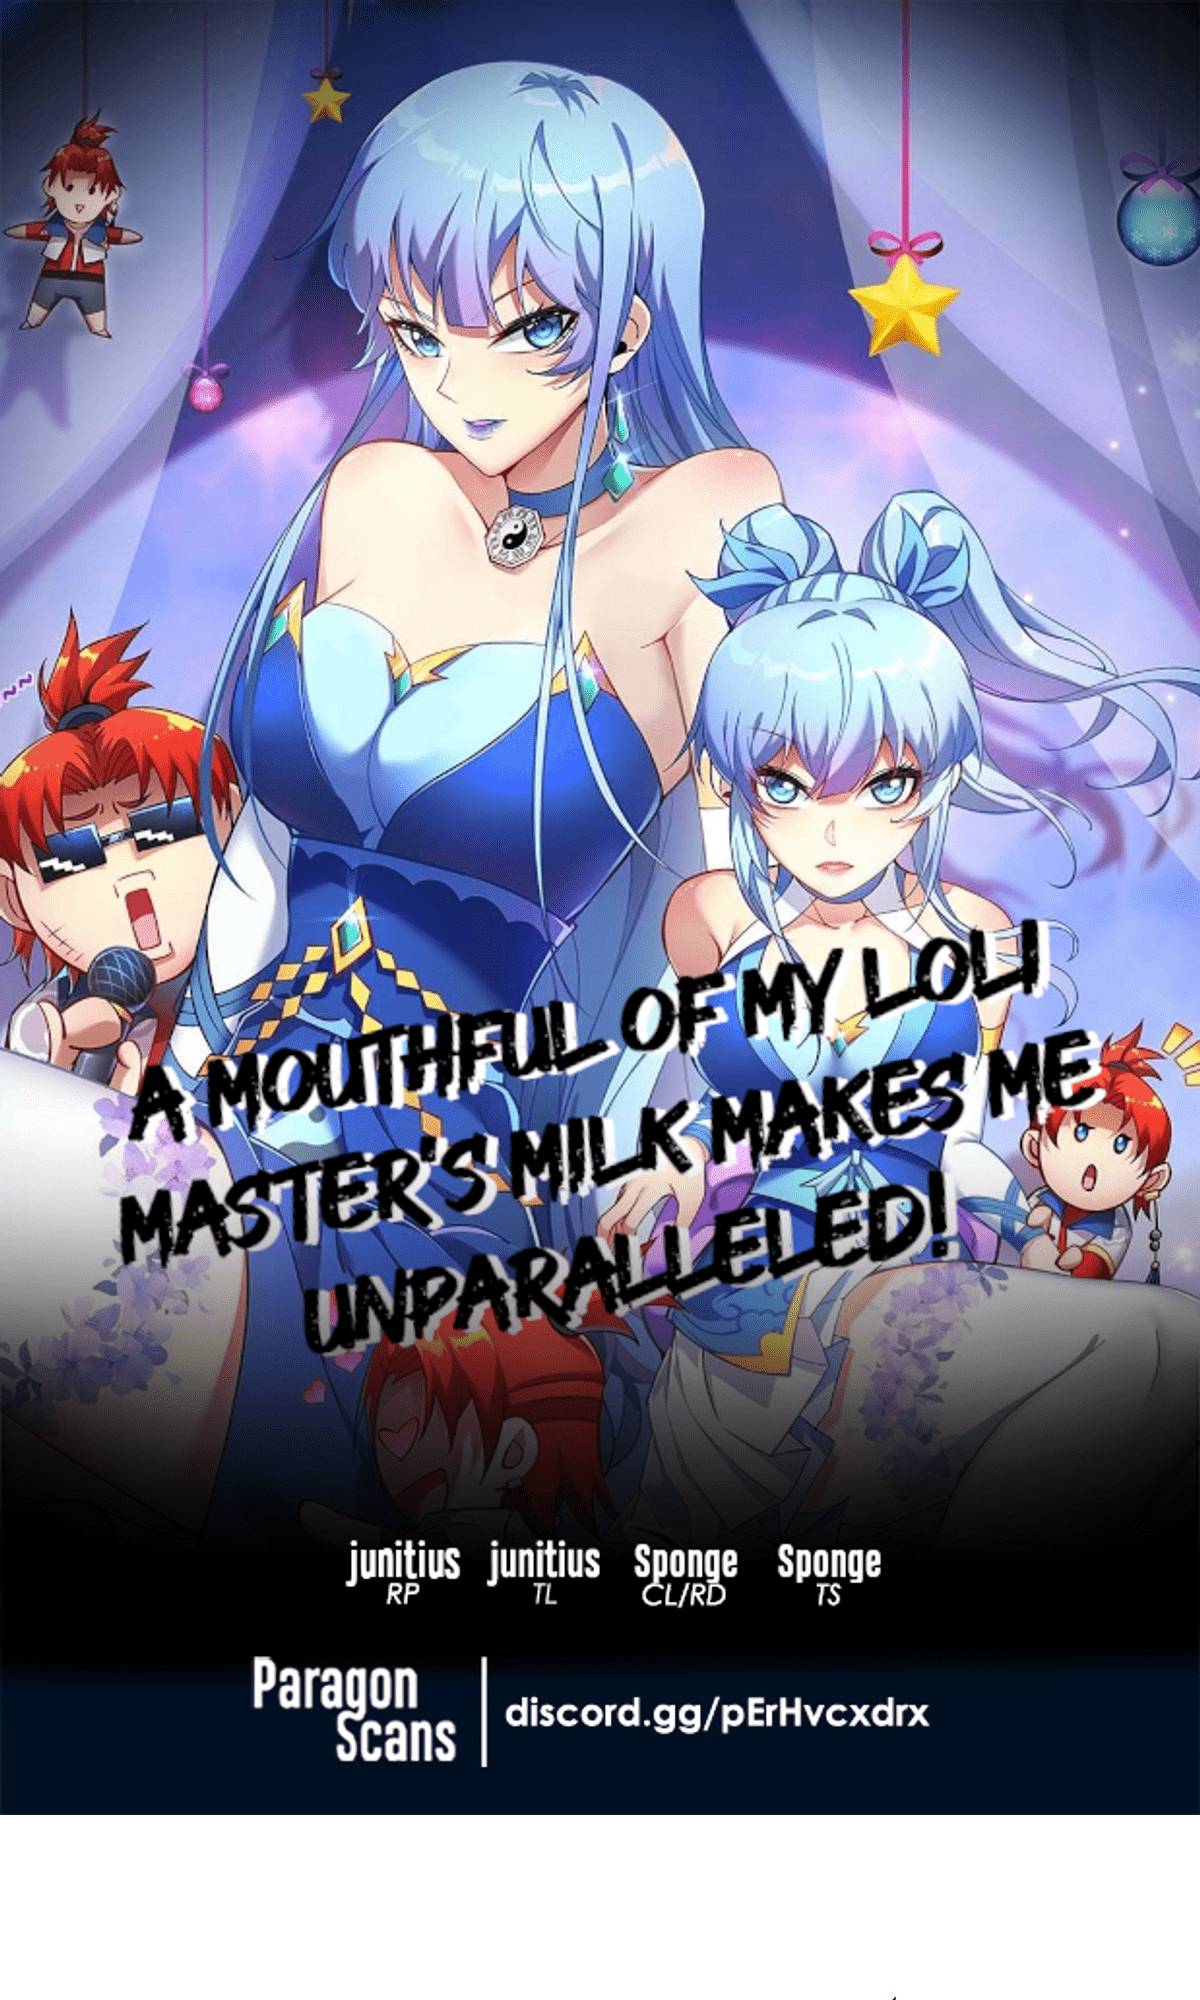 A Mouthful of My Loli Master's Milk Makes Me Unparalleled - chapter 25 - #1